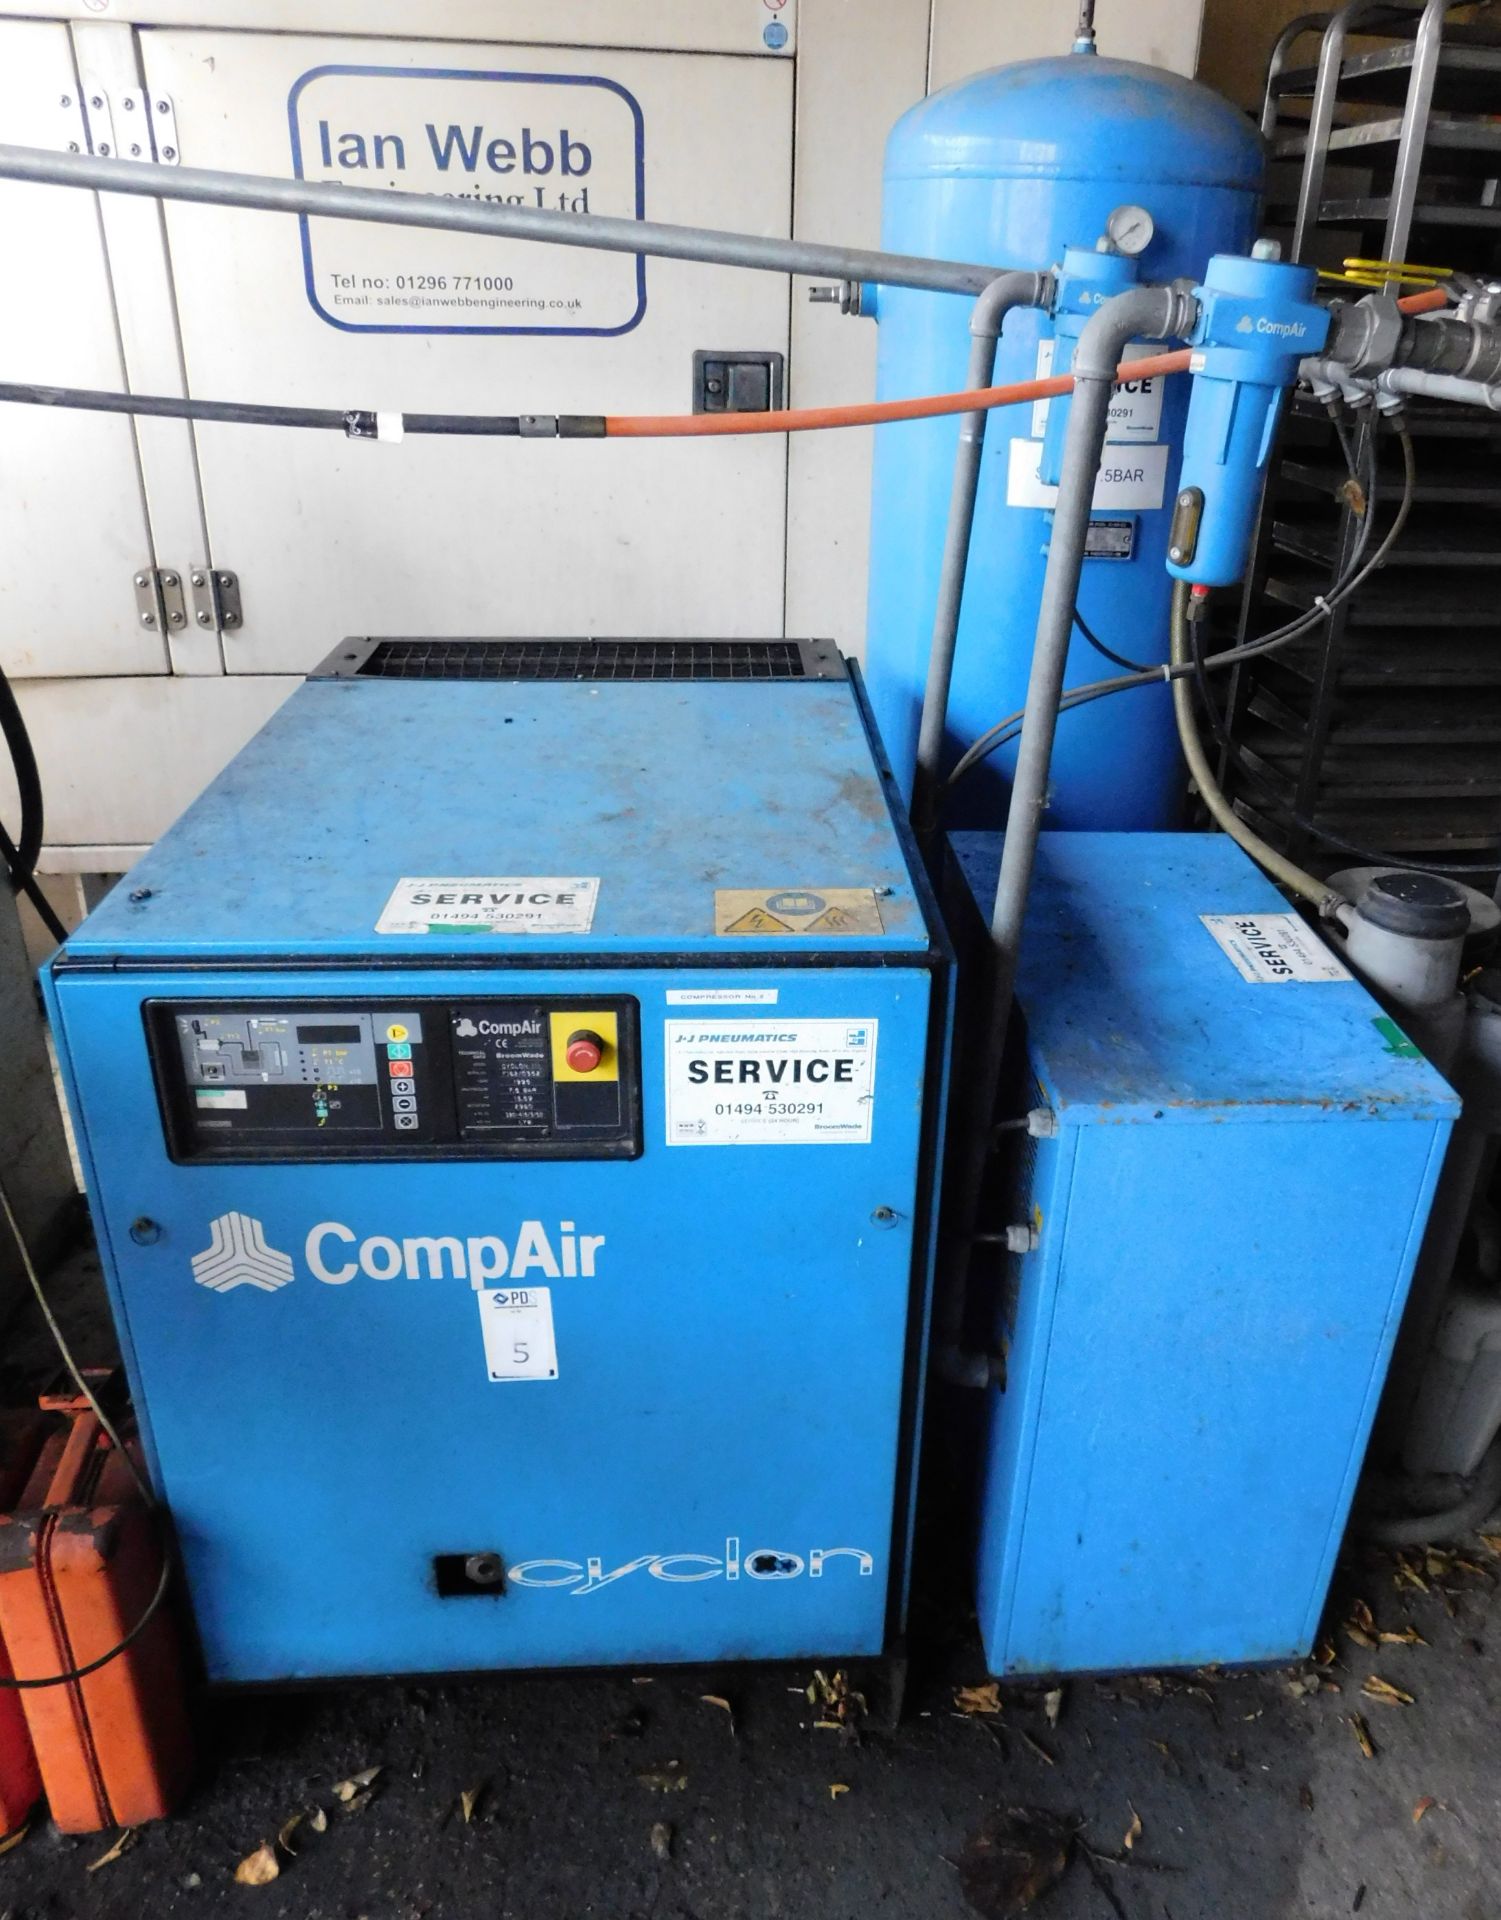 Compair Cyclon iii Broomwade Compressor, s/n F162/0352, 7.5bar (1995) with Air Dryer & Vertical